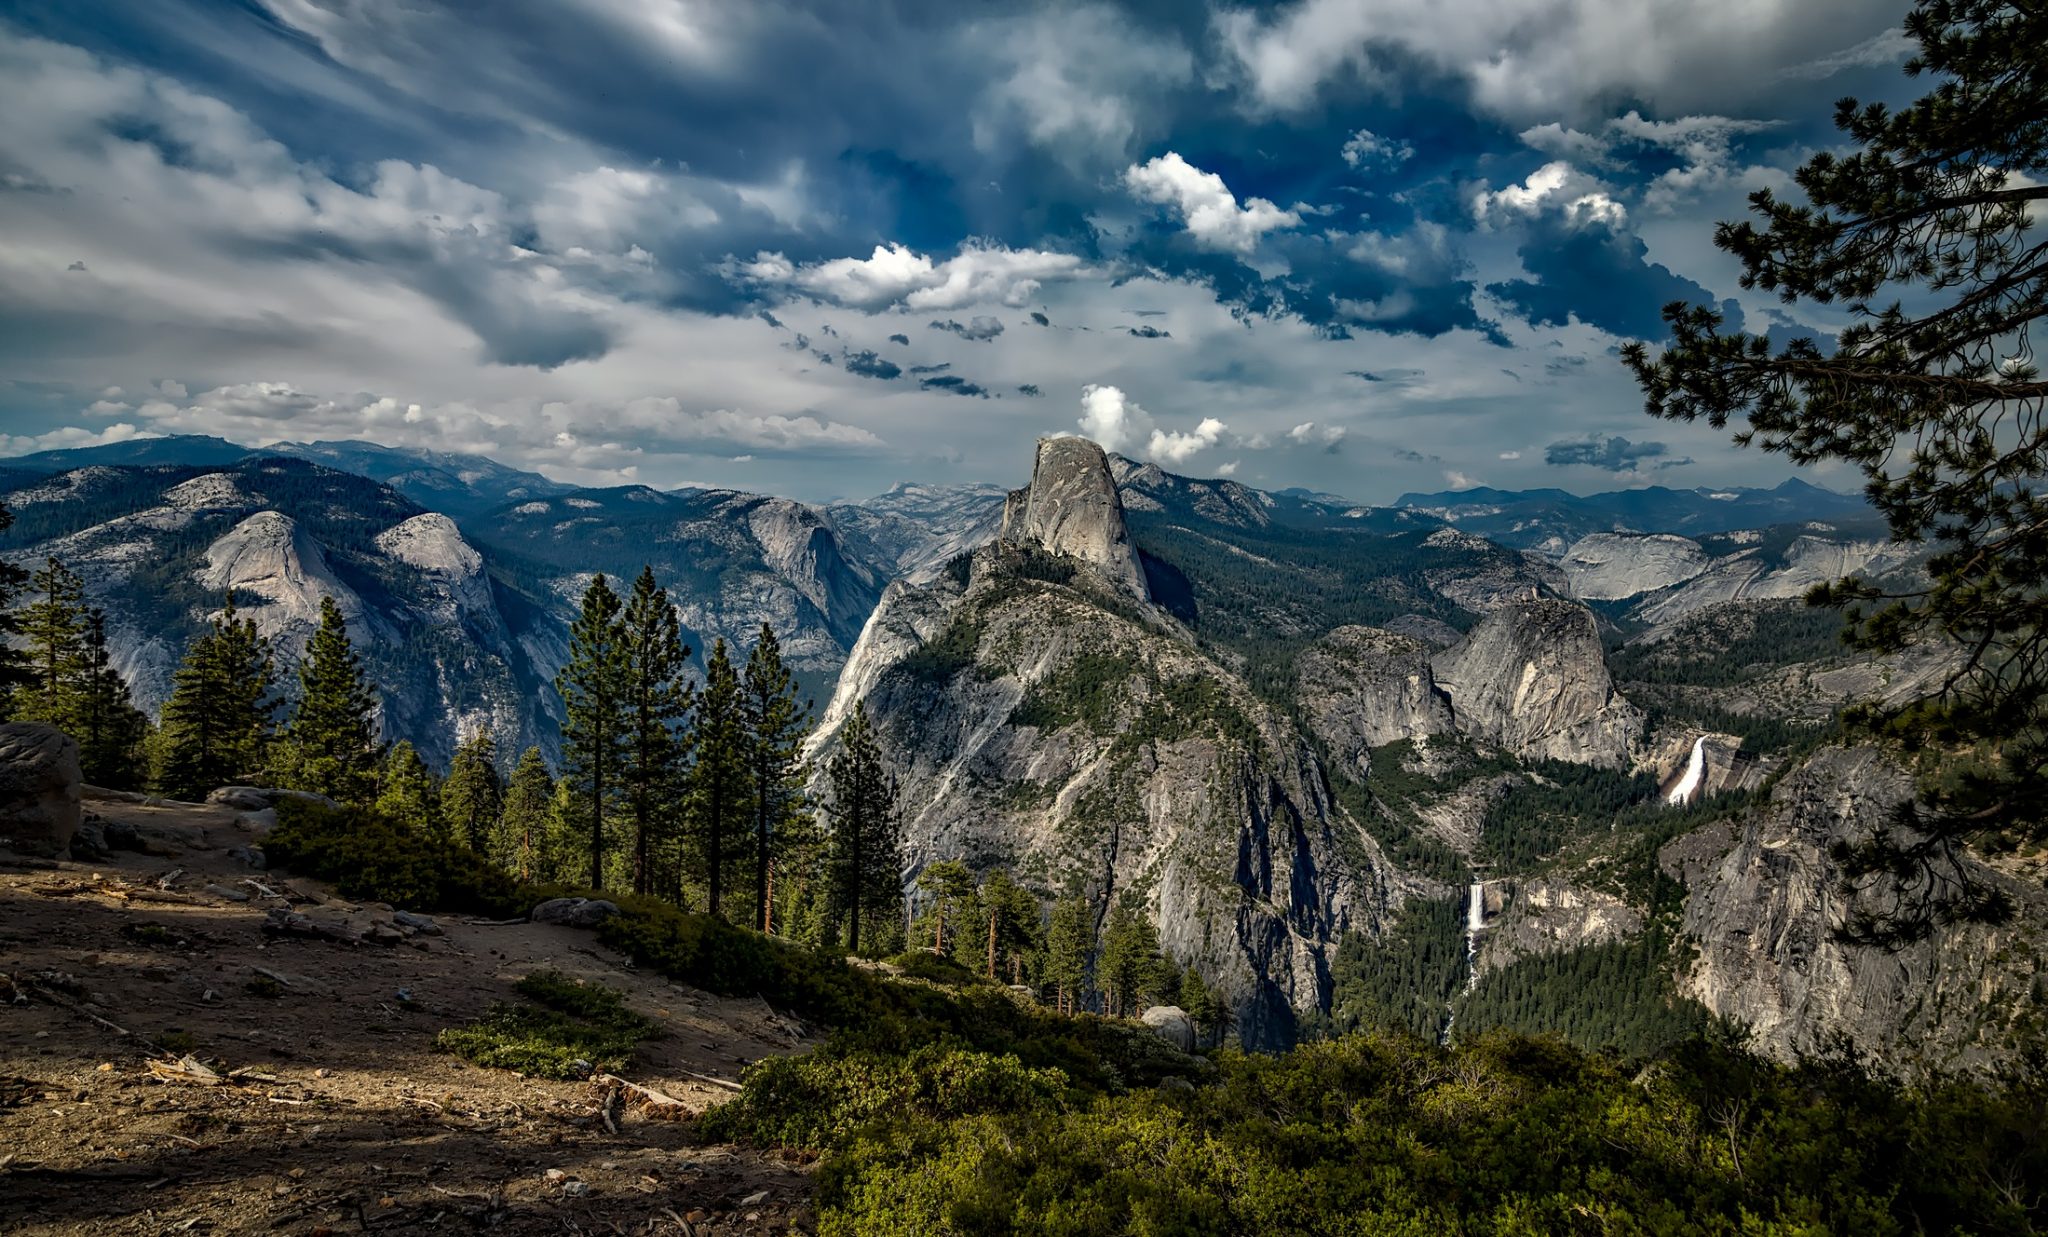 The Discovery of Yosemite: Part 1